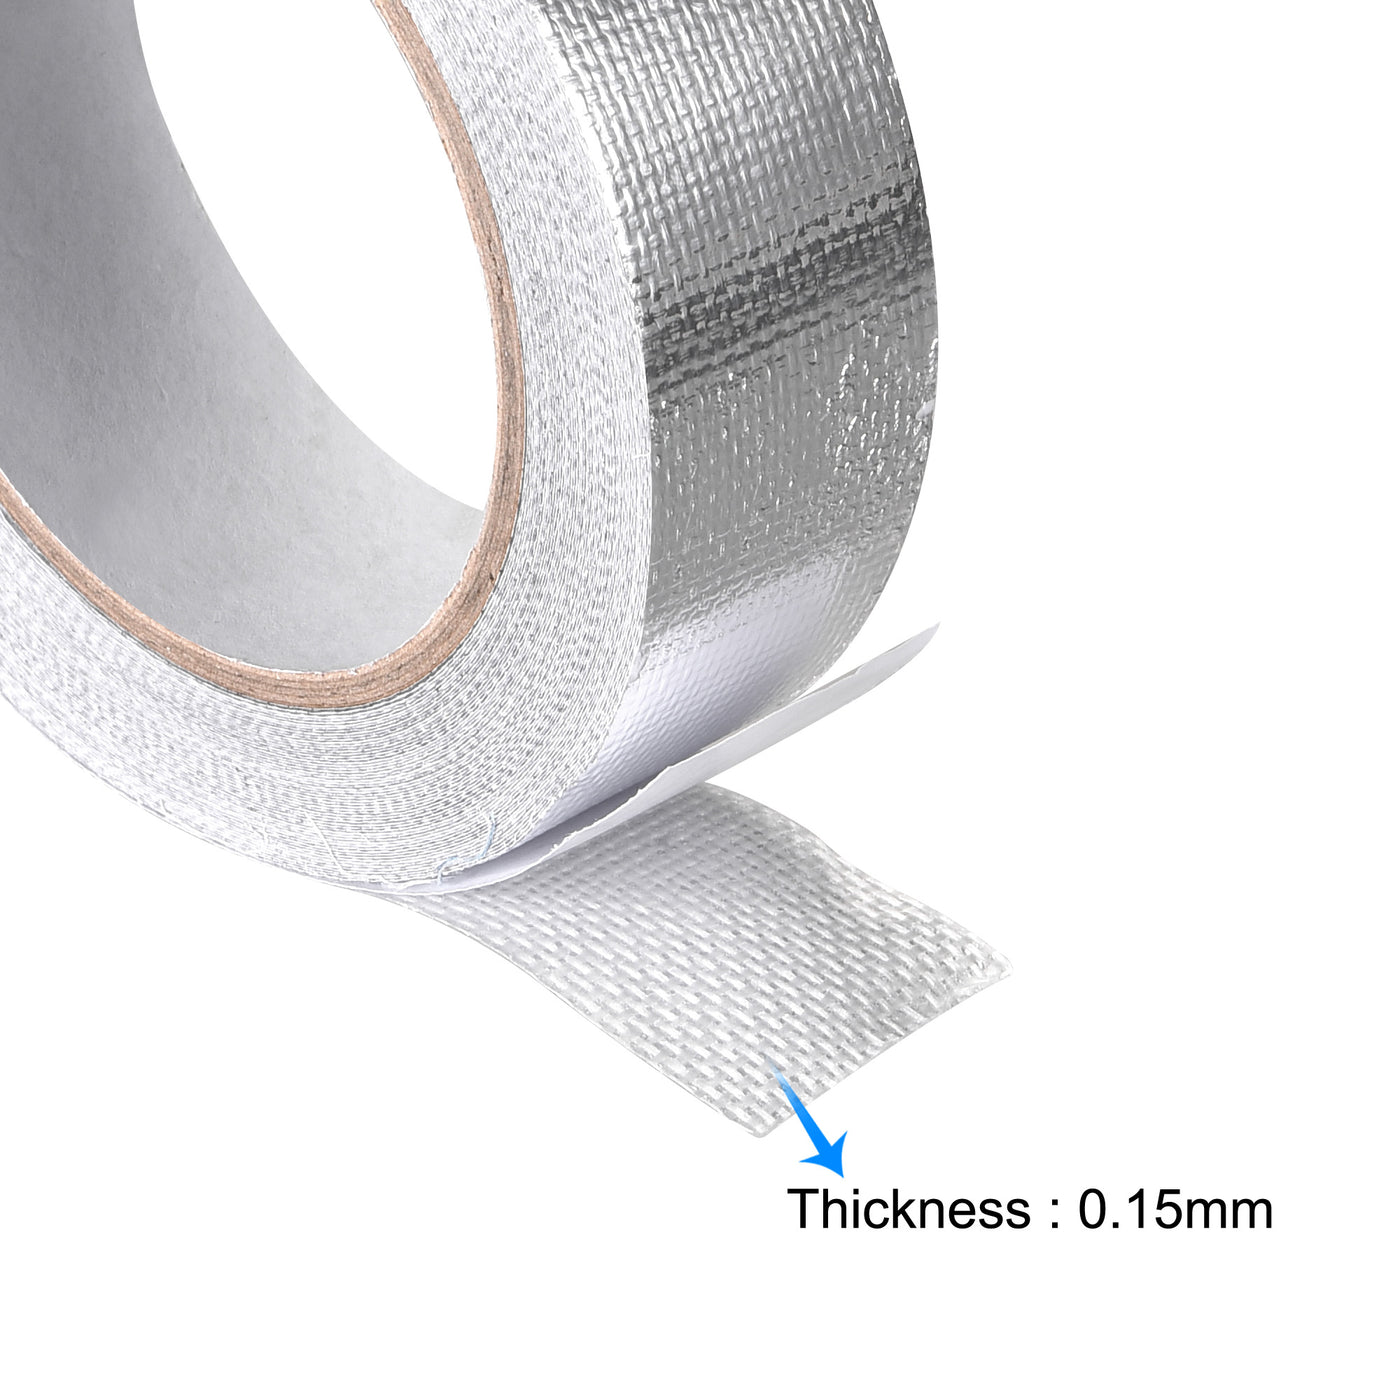 uxcell Uxcell Aluminum Foil Tape High-Temperature Tape for HVAC,Sealing 40mmx20m/65ft